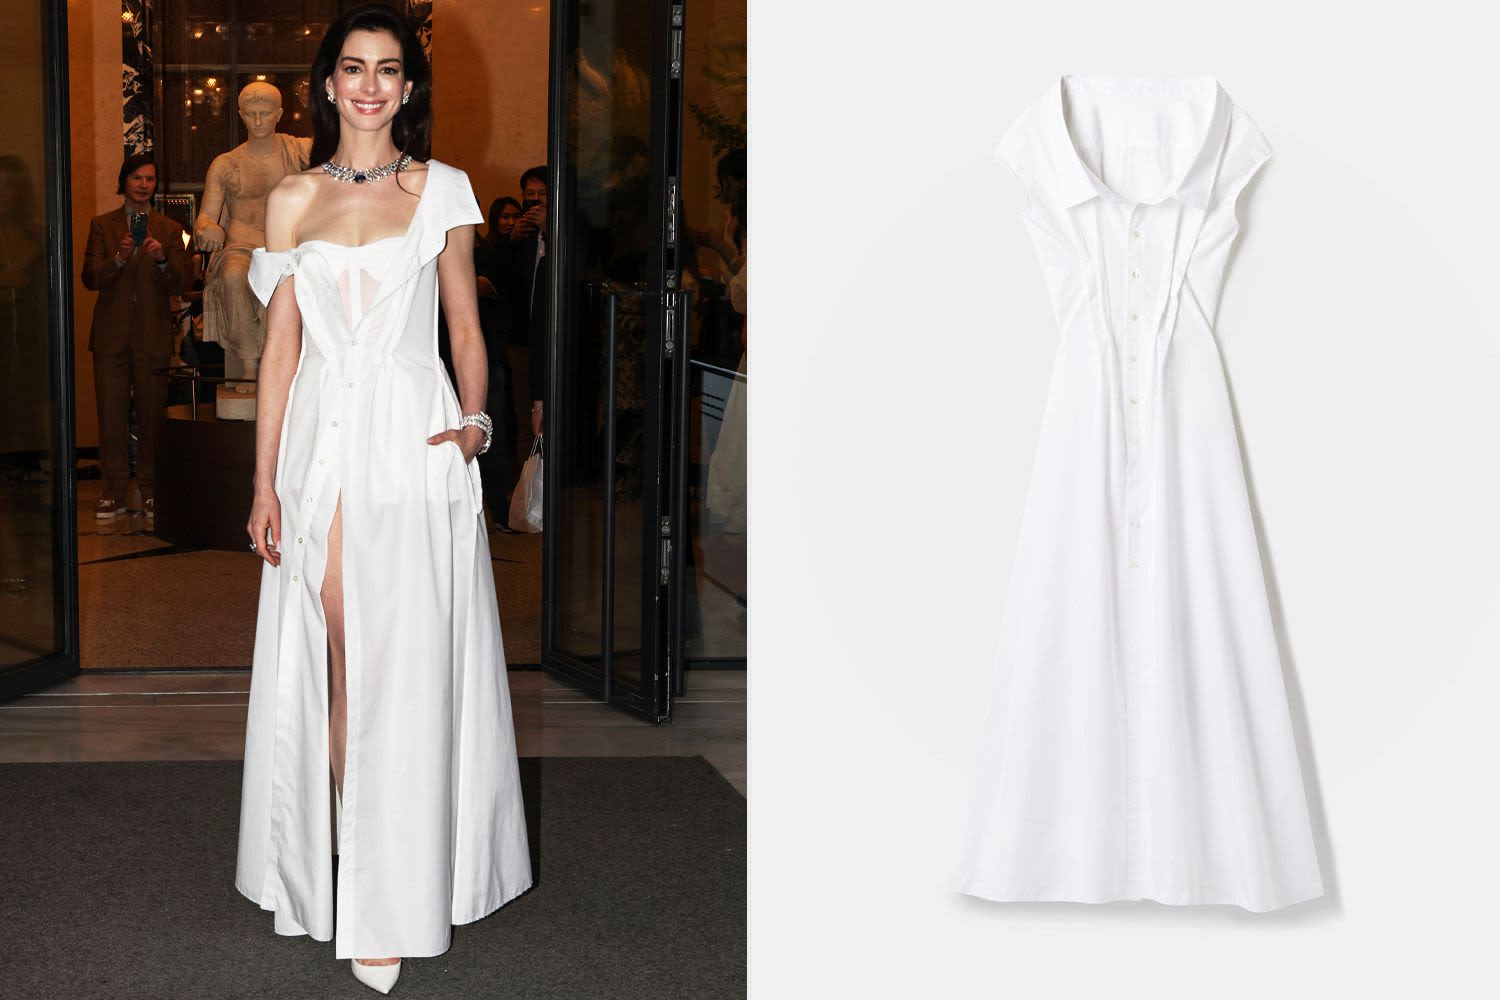 Gap Just Released a Version of Anne Hathaway's White Shirt Dress for $158 — But It Sold Out in Under 3 Hours